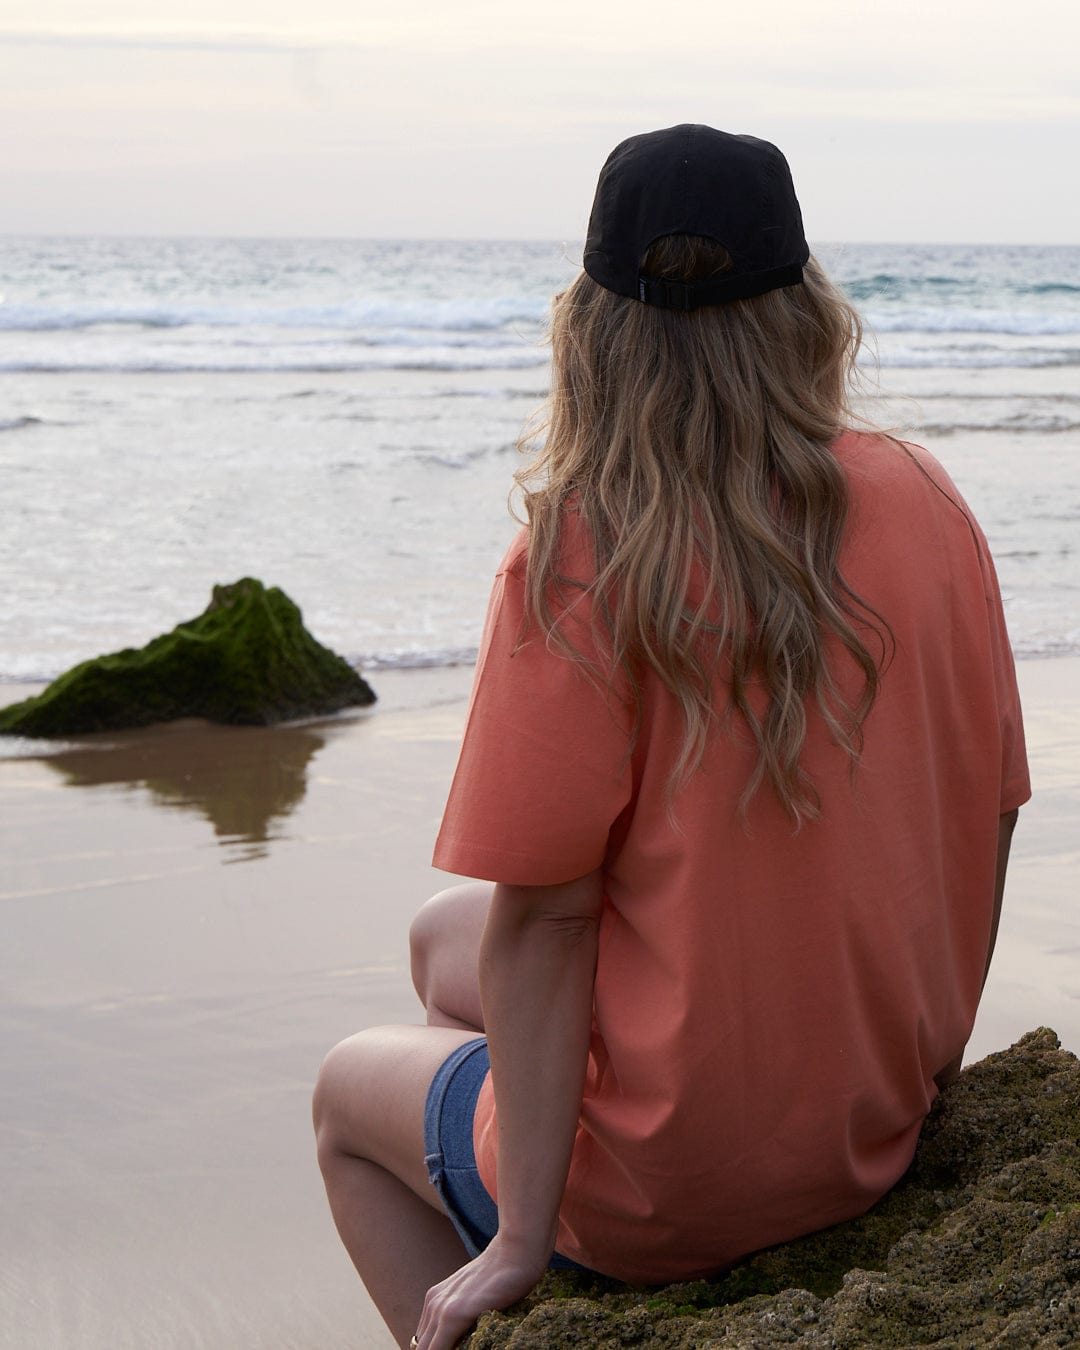 A person with long hair, wearing a Saltrock Gaitor 5 Panel UPF Cap - Black with an adjustable strap and an orange shirt, sits on a rock and gazes out at the ocean waves.